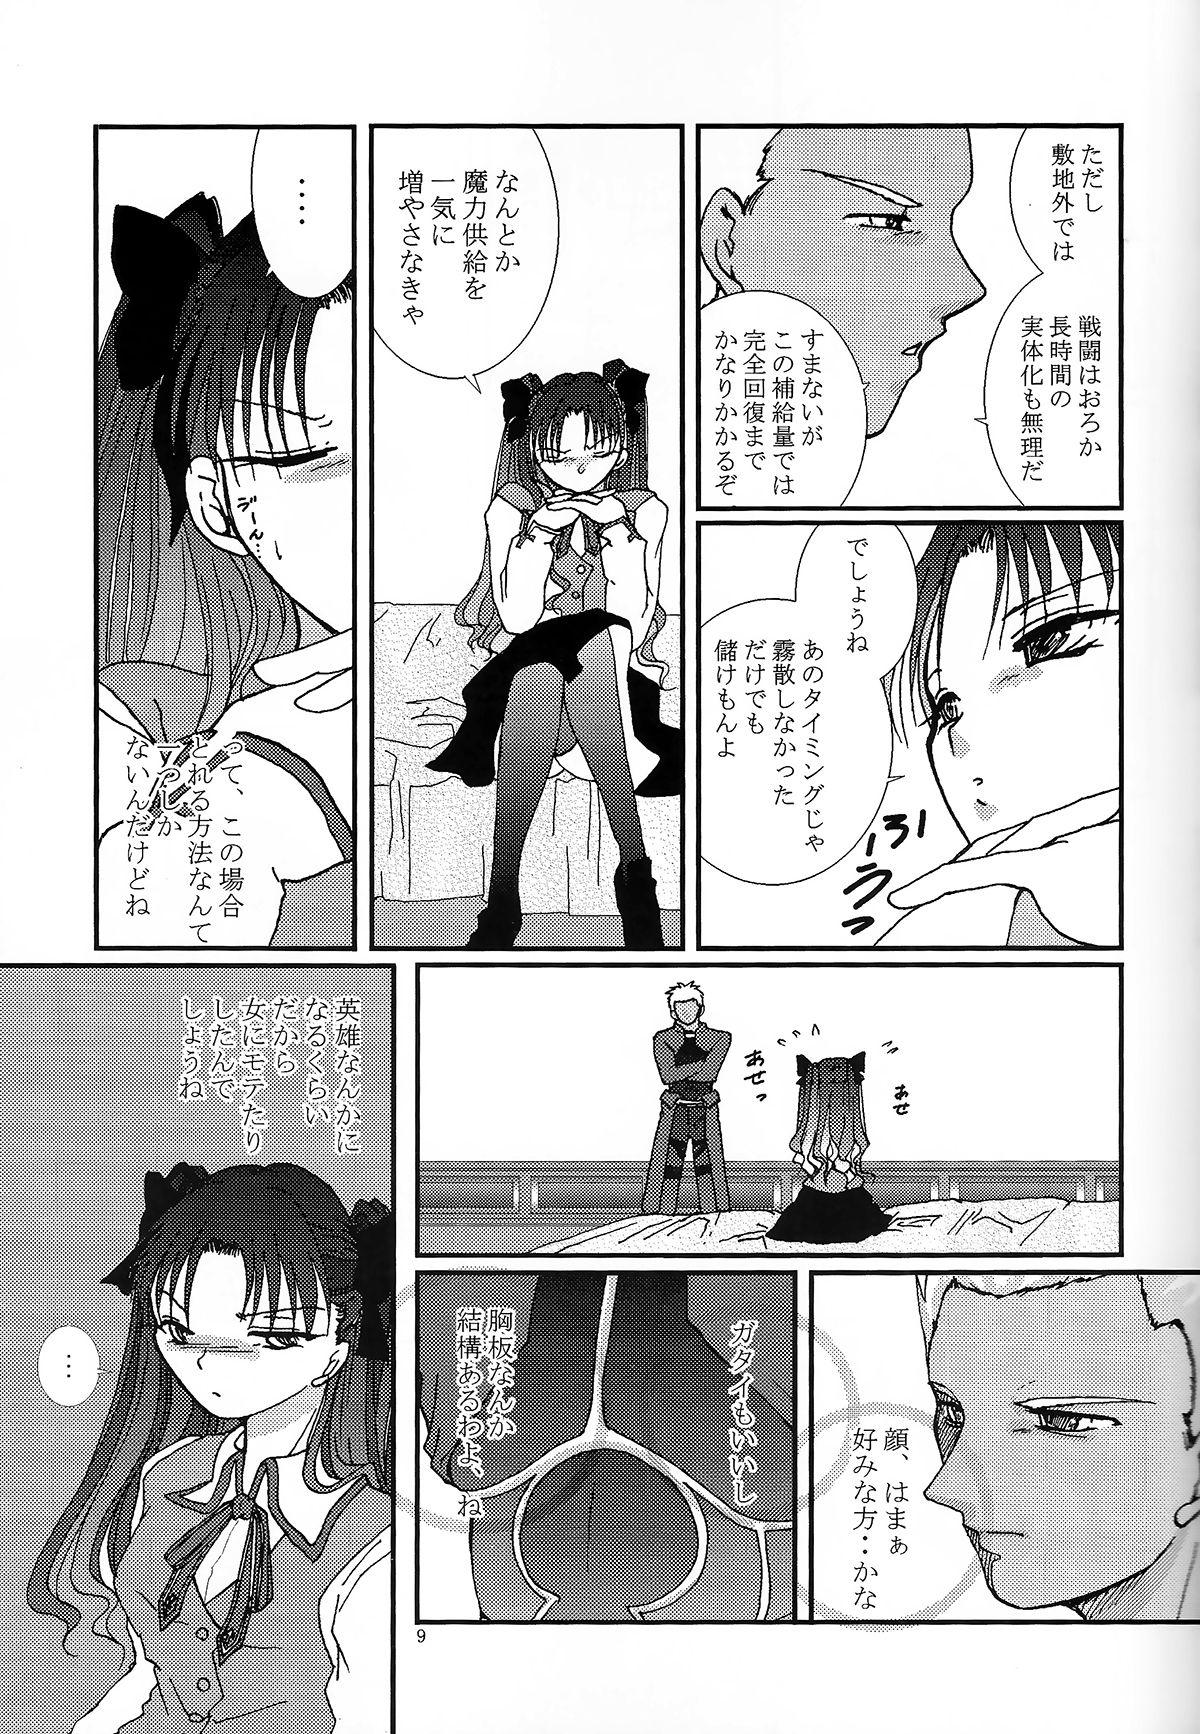 Ftvgirls Question-7 - Fate stay night Facials - Page 7